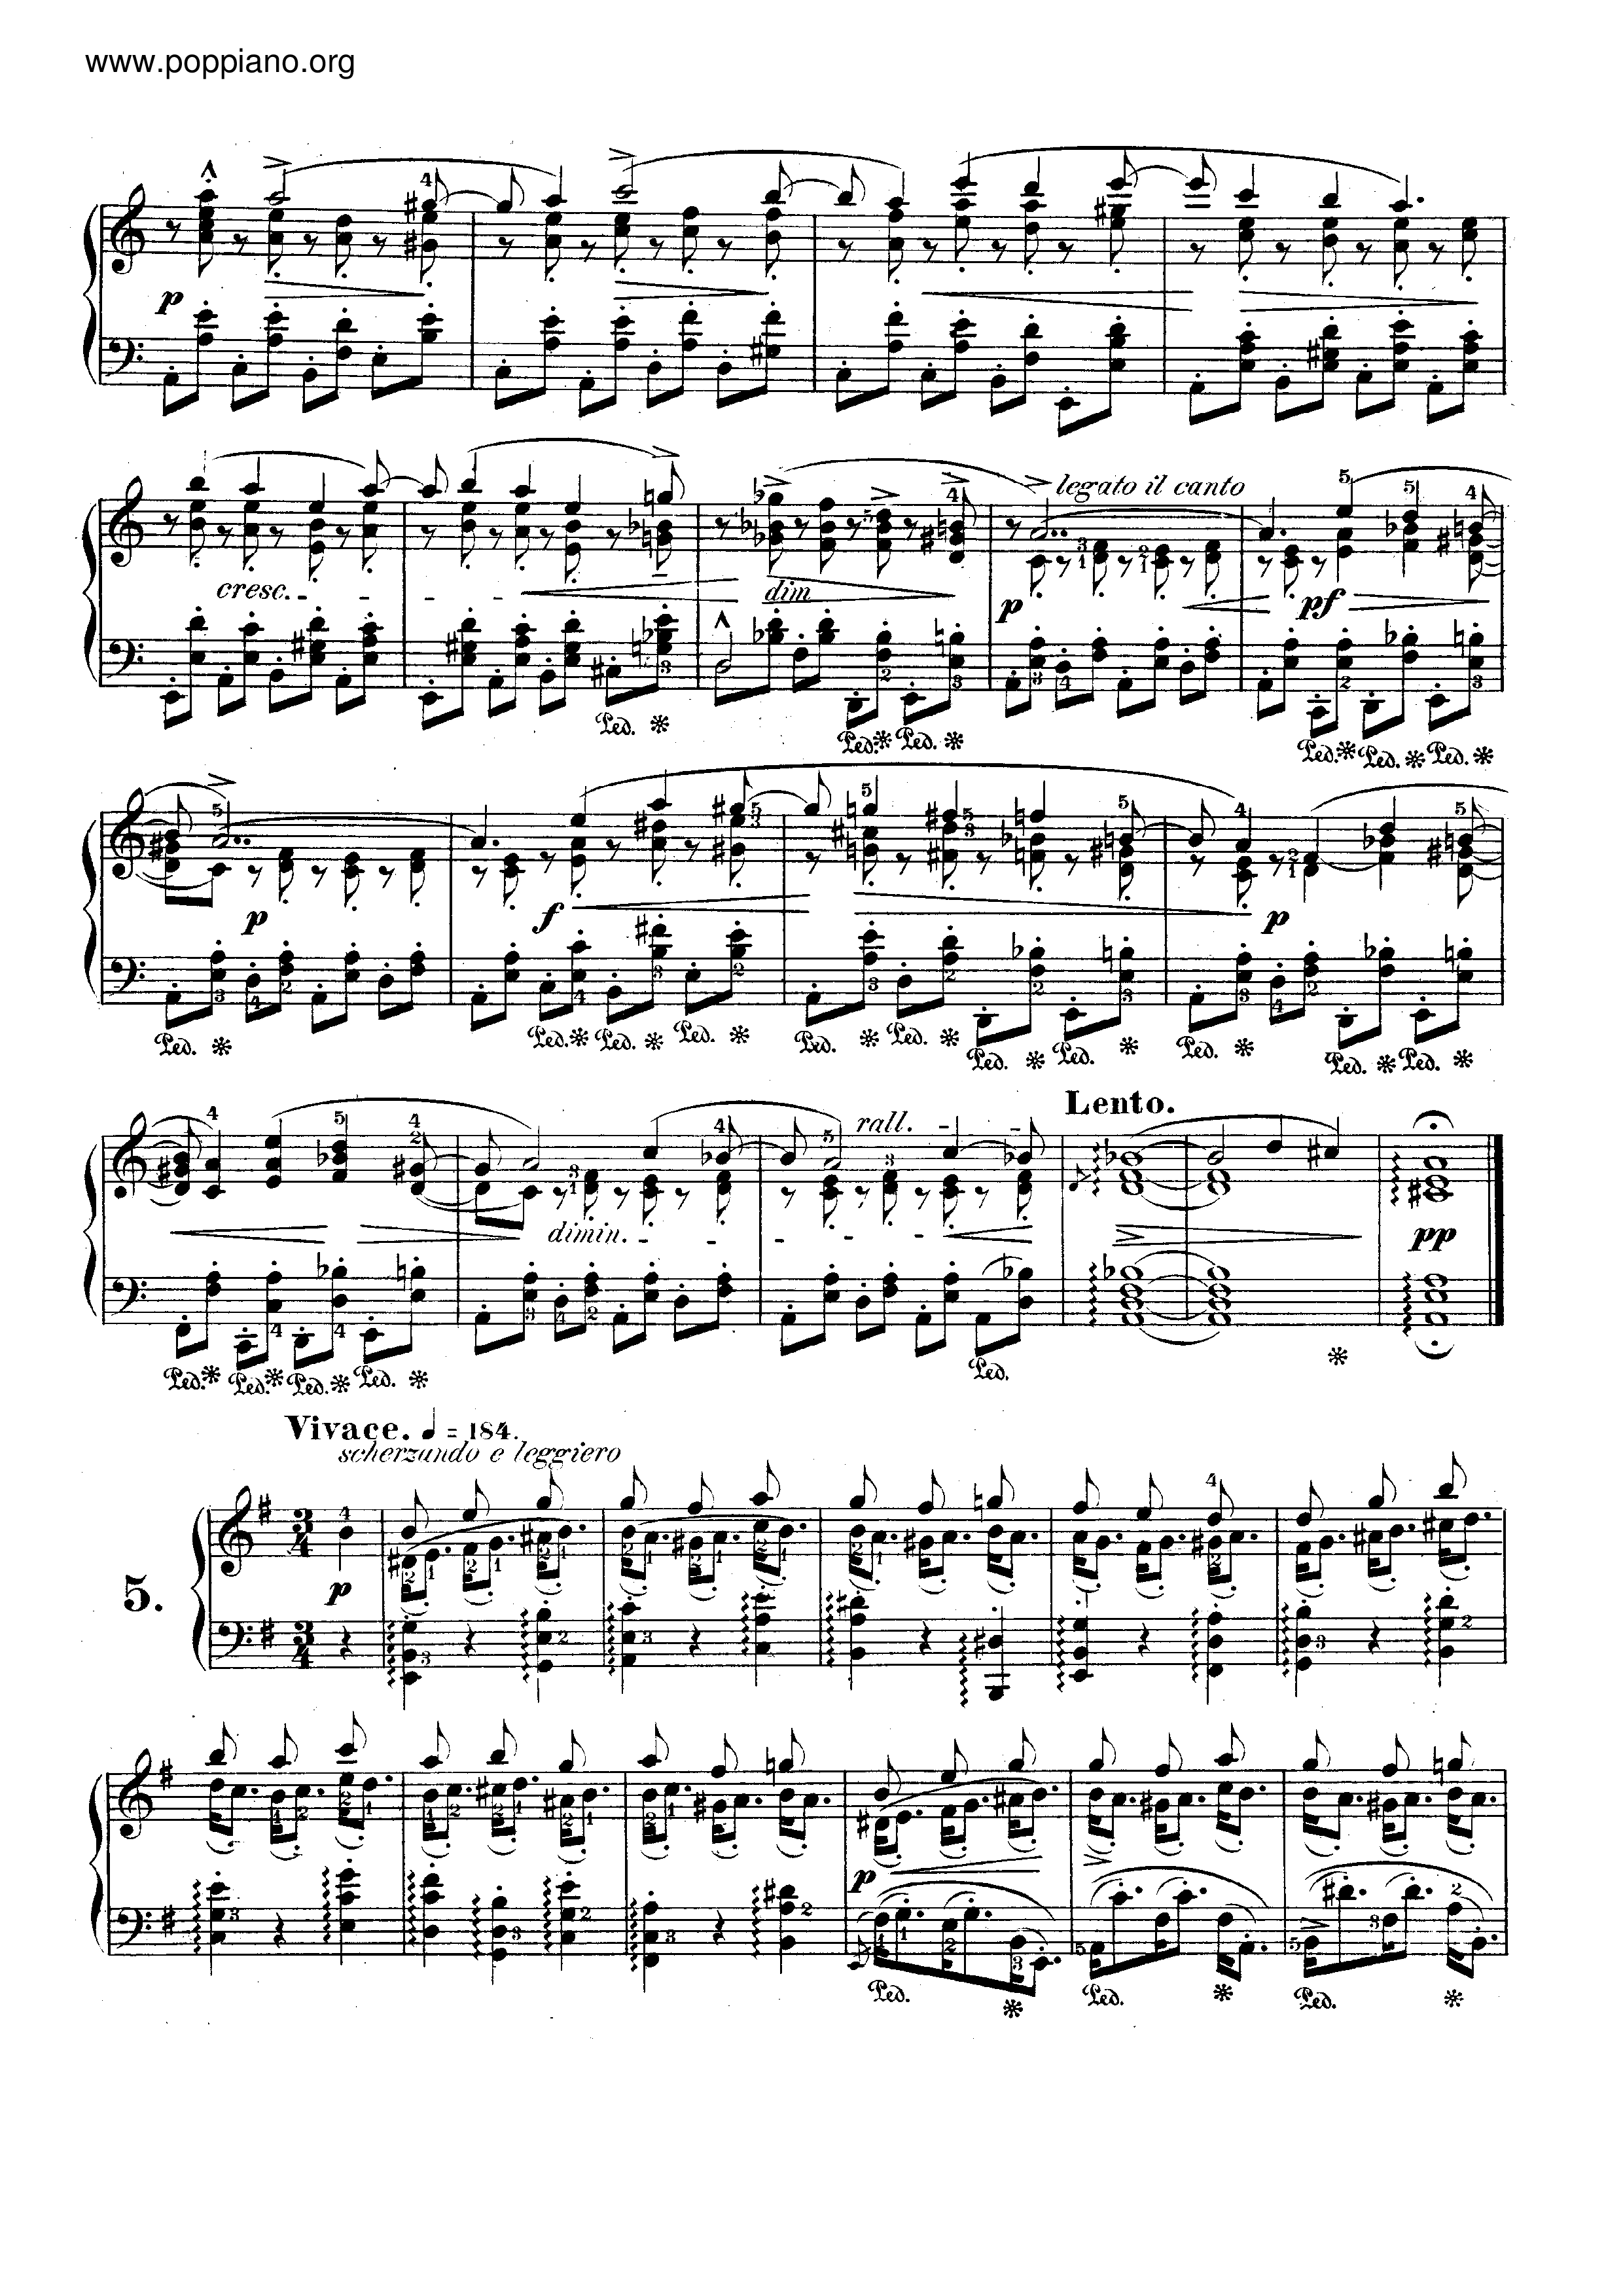 12 Études, Op. 25: No. 5 in E Minor Wrong Note琴谱